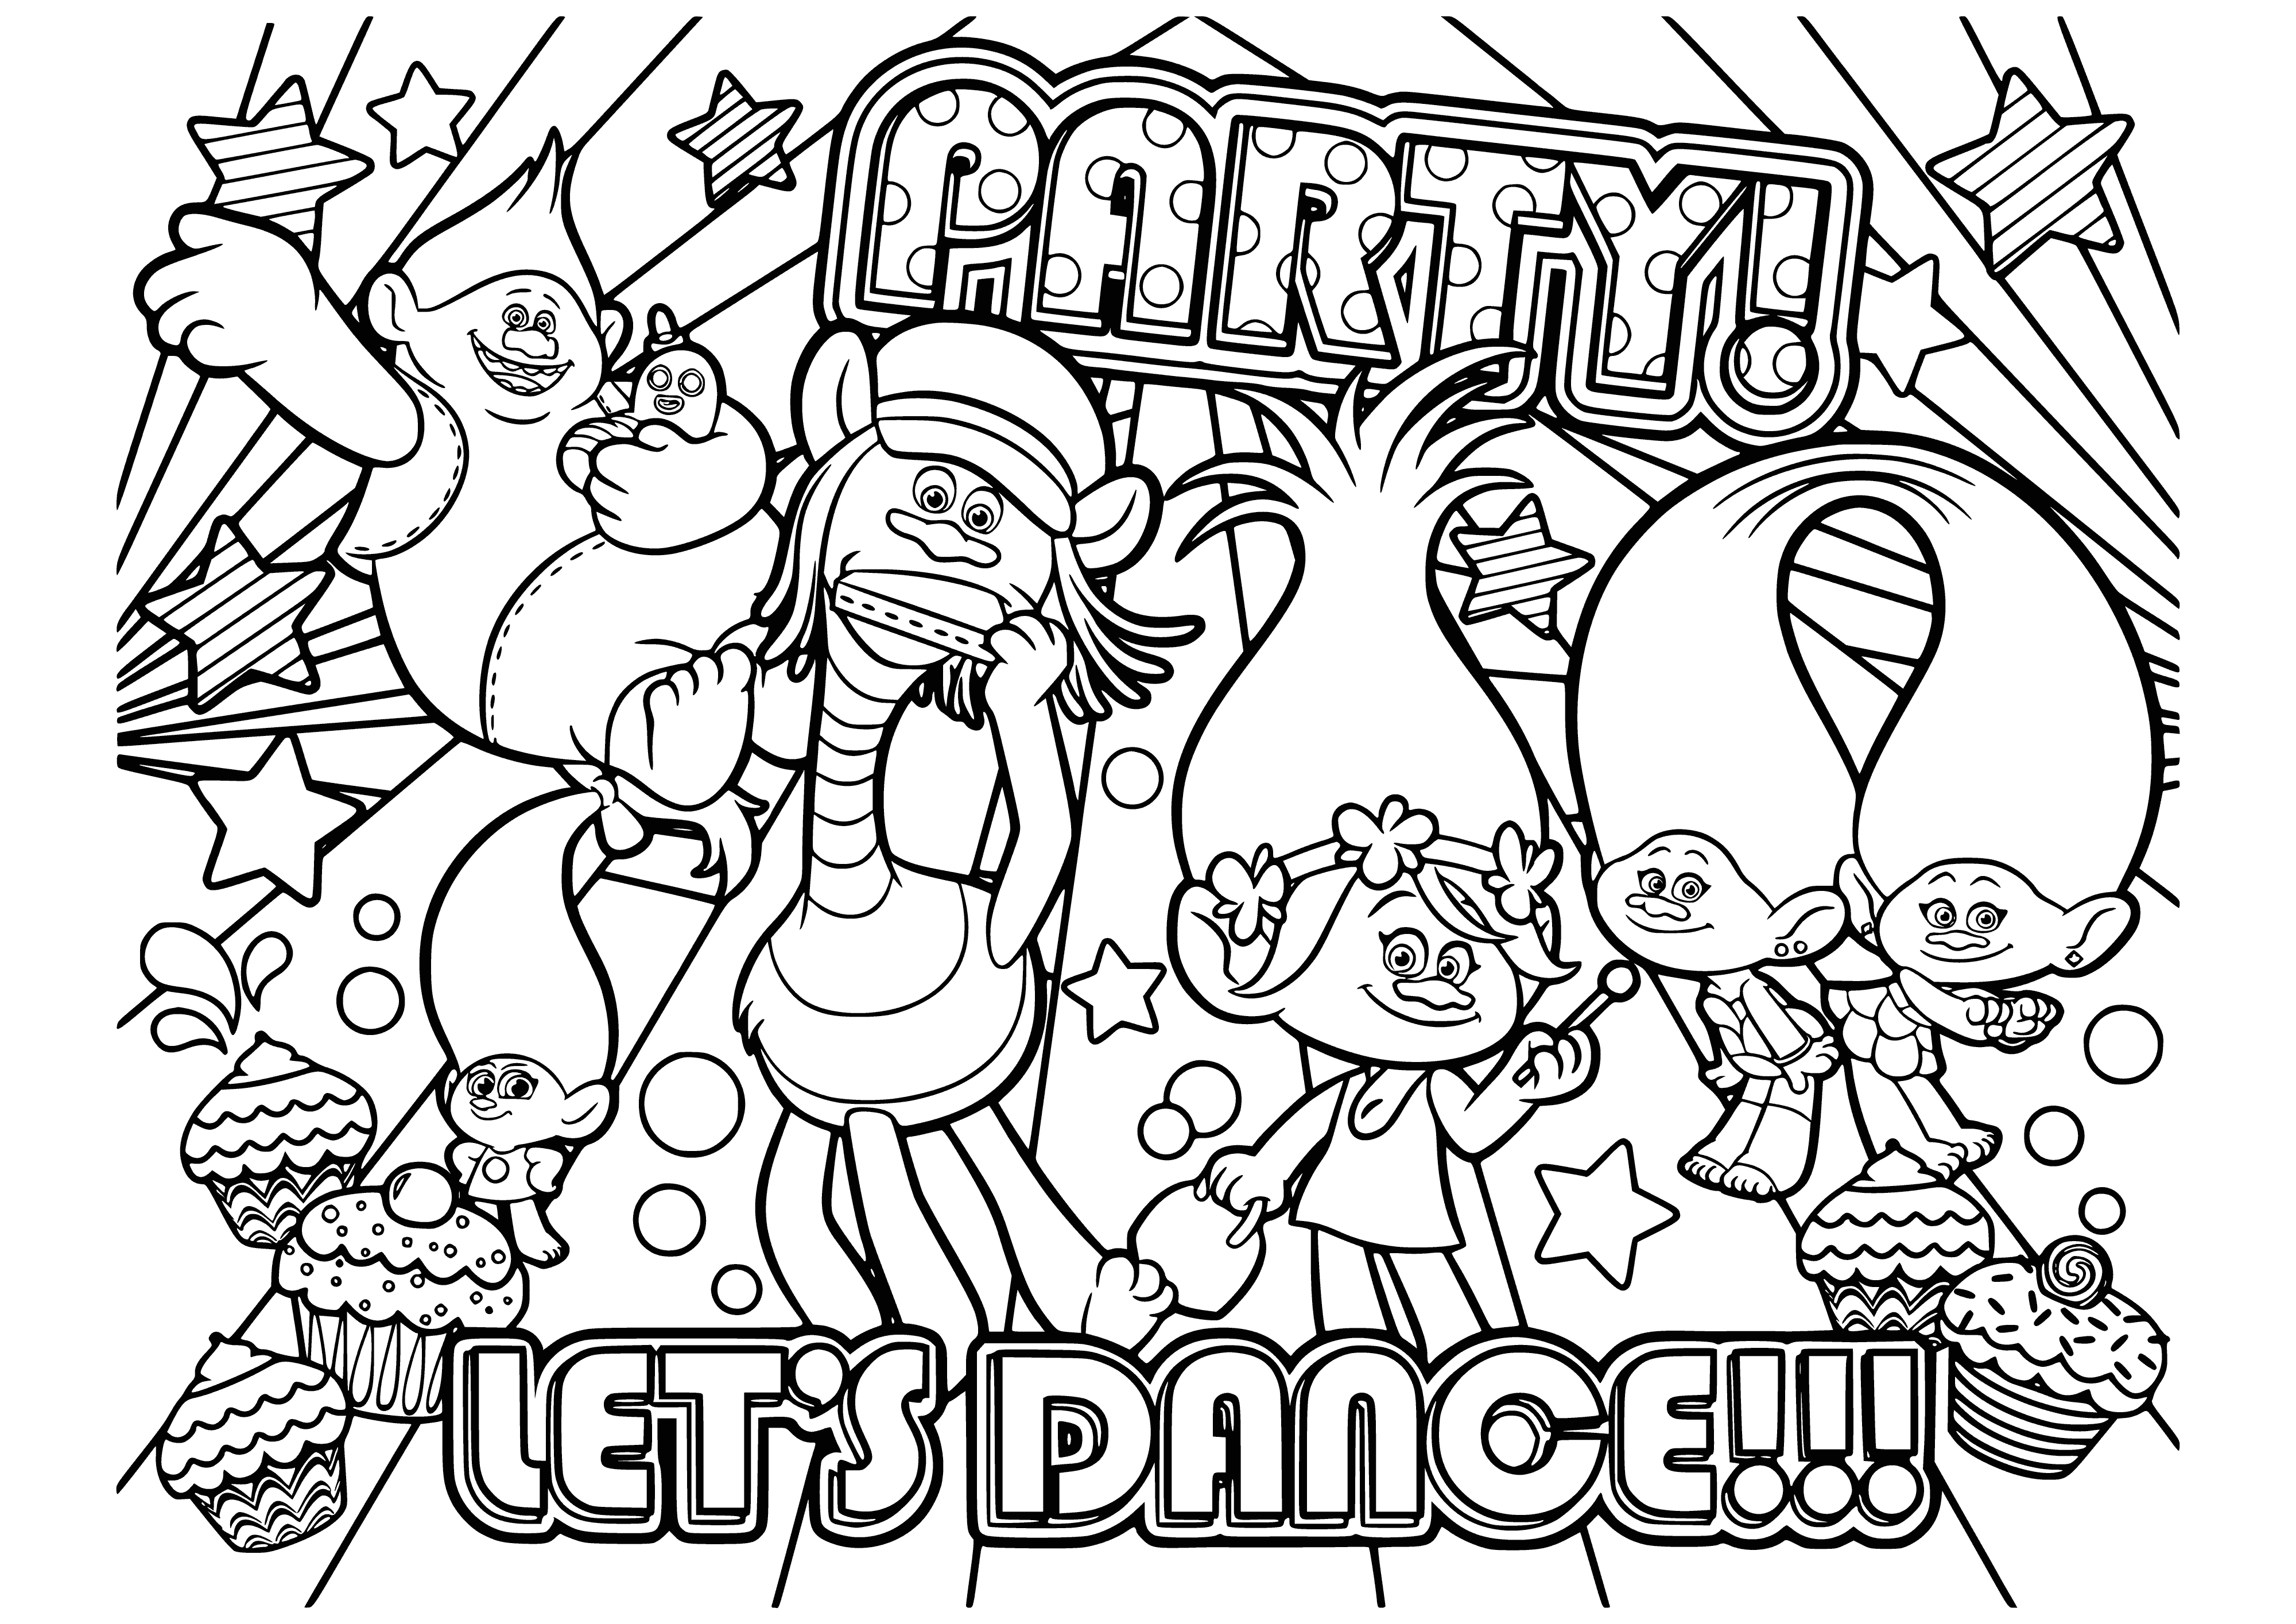 Troll Party coloring page